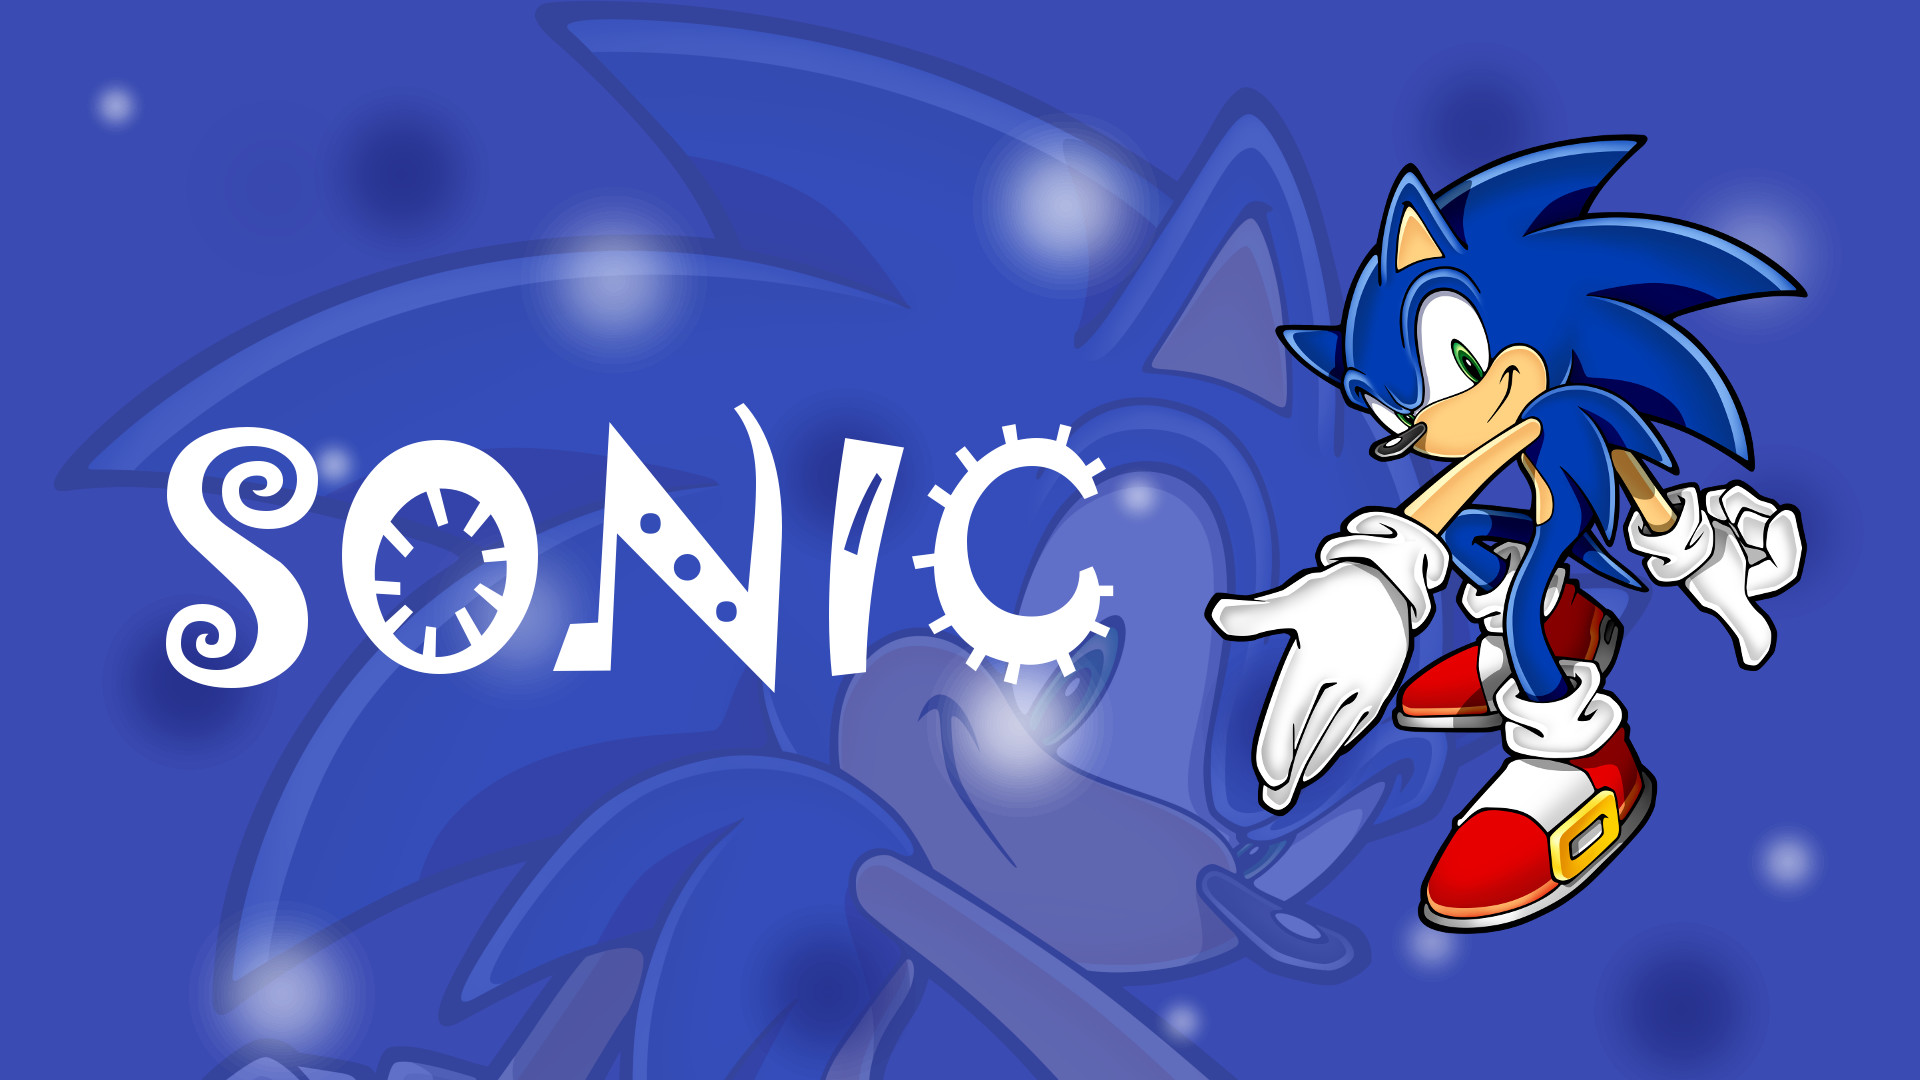 1920x1080 johsouza images Sonic The Hedgehog Hintergrund HD wallpaper and background  photos